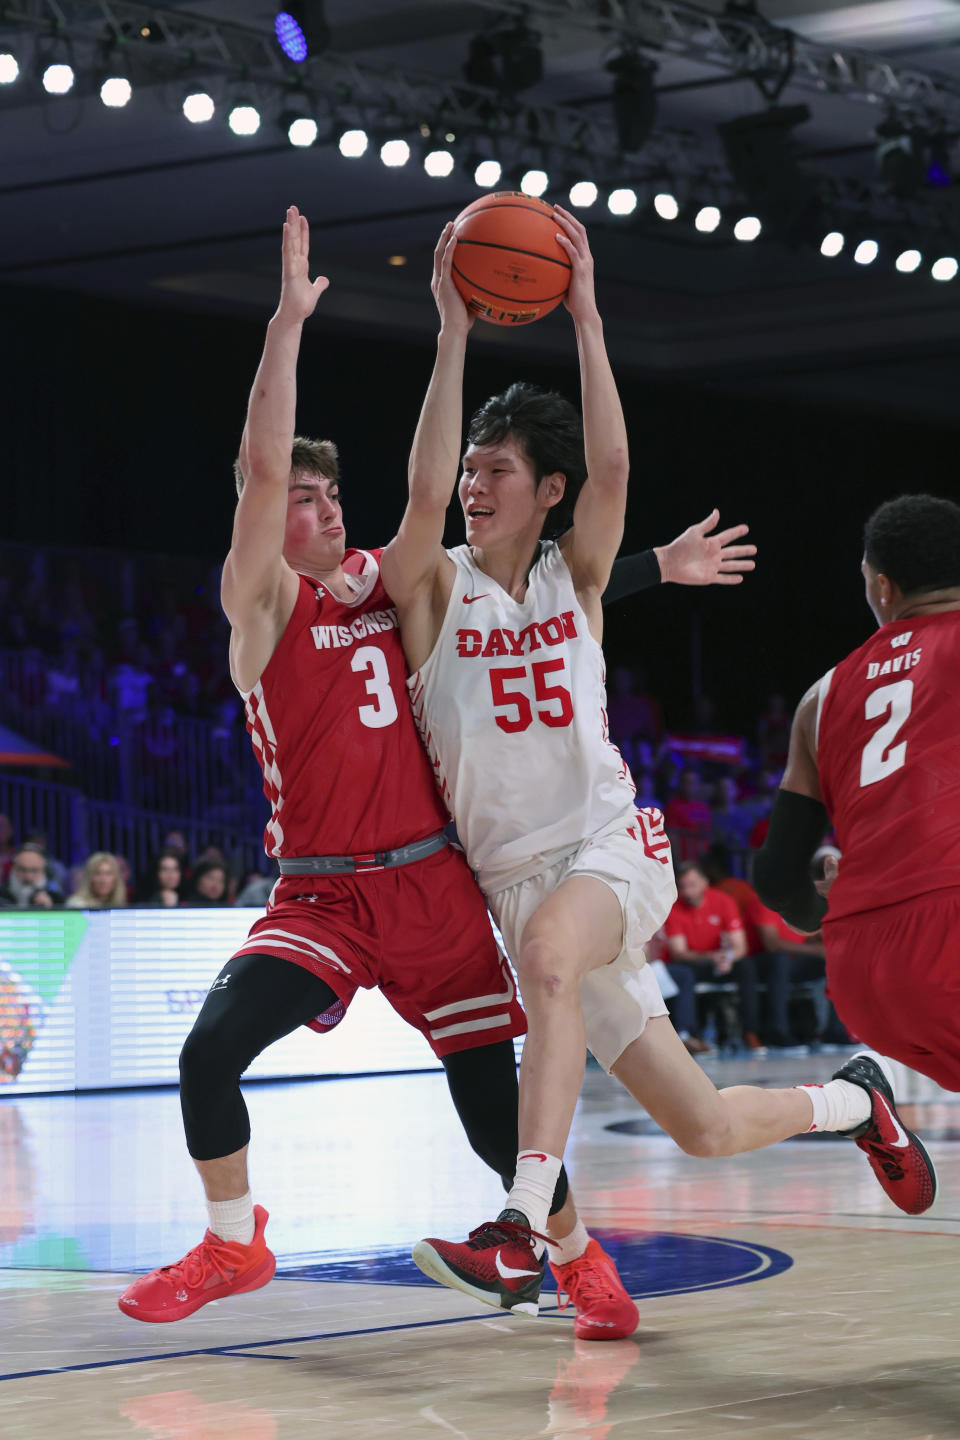 This photo provided by Bahamas Visual Services shows Dayton guard Mike Sharavjamts (55) driving against Wisconsin guard Connor Essegian (3) during an NCAA college basketball game at the Battle 4 Atlantis at Paradise Island, Bahamas, Wednesday, Nov. 23, 2022. . (Tim Aylen/Bahamas Visual Services via AP)